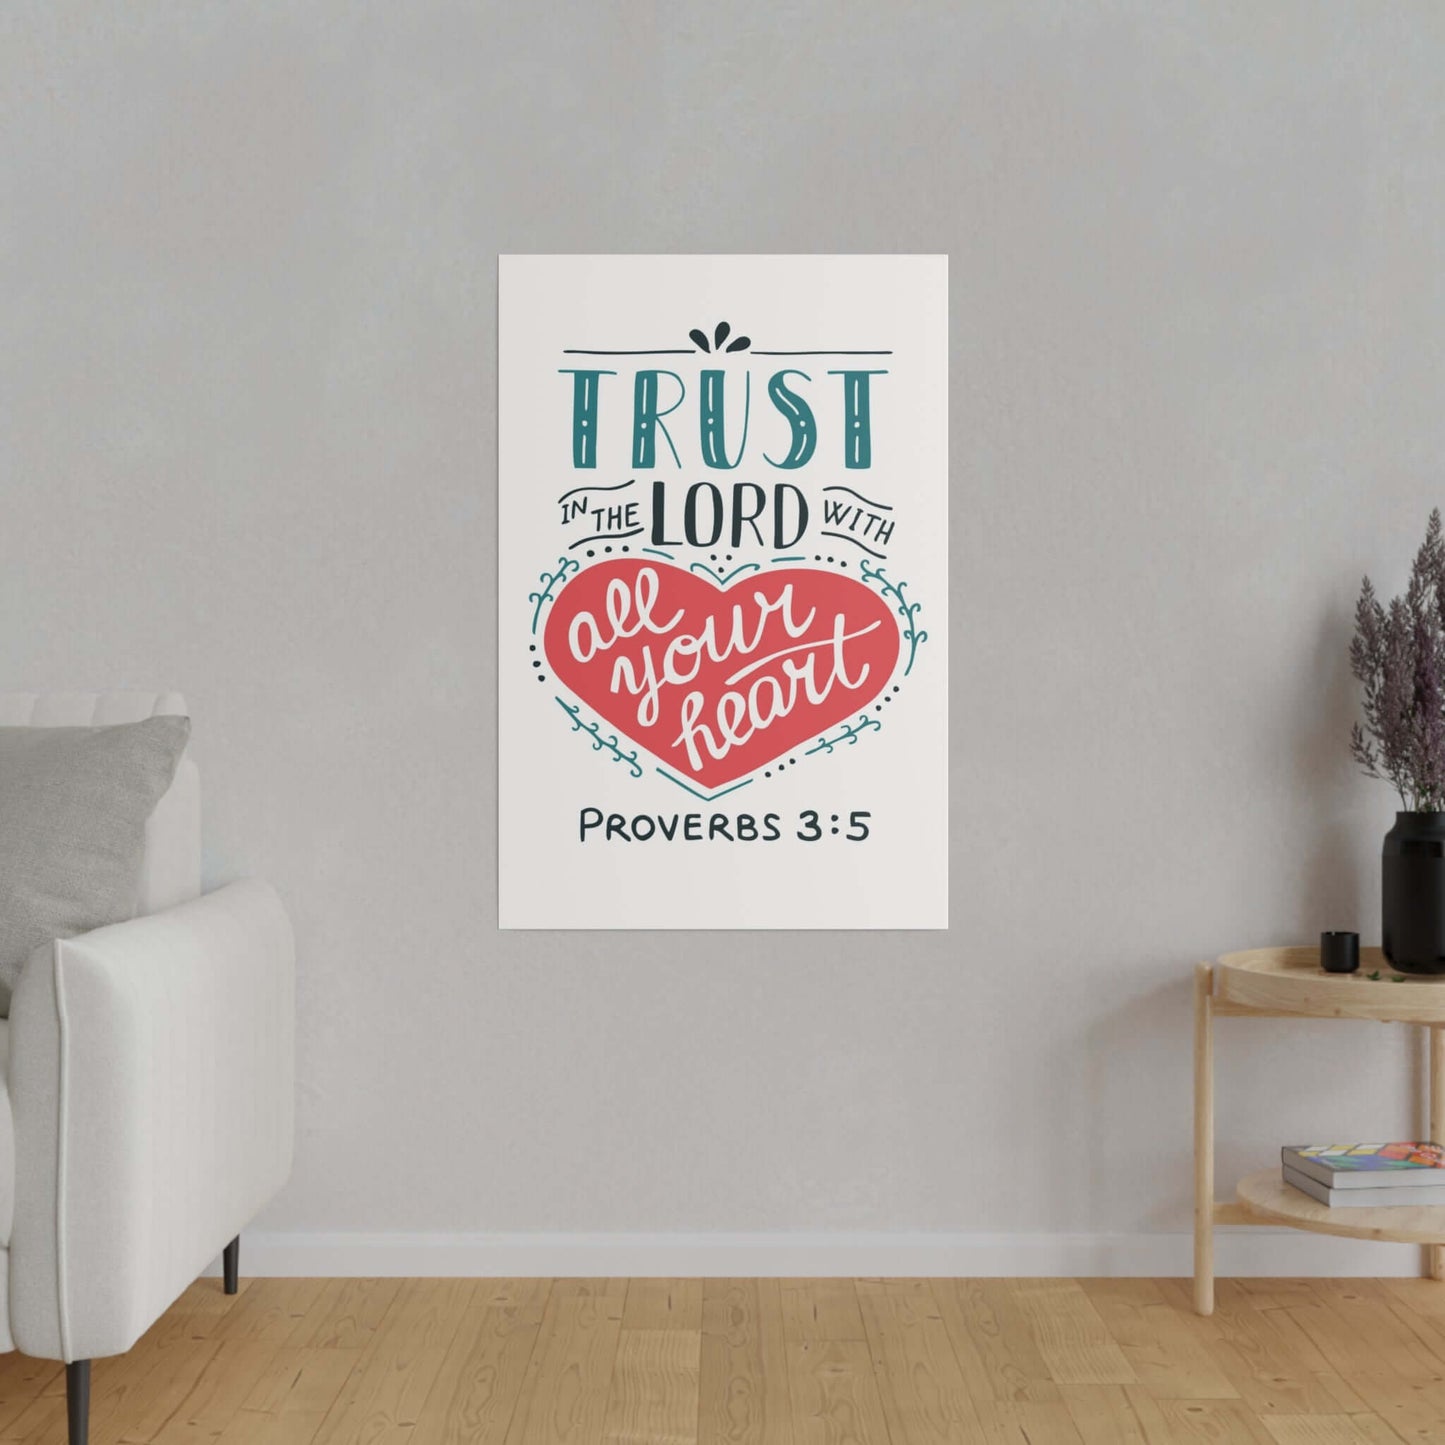 Inspirational Bedroom Canvas Art with Proverbs 3:5 - Eco-Friendly & Durable | Art & Wall Decor,Canvas,Decor,Eco-friendly,Hanging Hardware,Holiday Picks,Home & Living,Indoor,Matte,Seasonal Picks,Sustainable,Wall,Wood